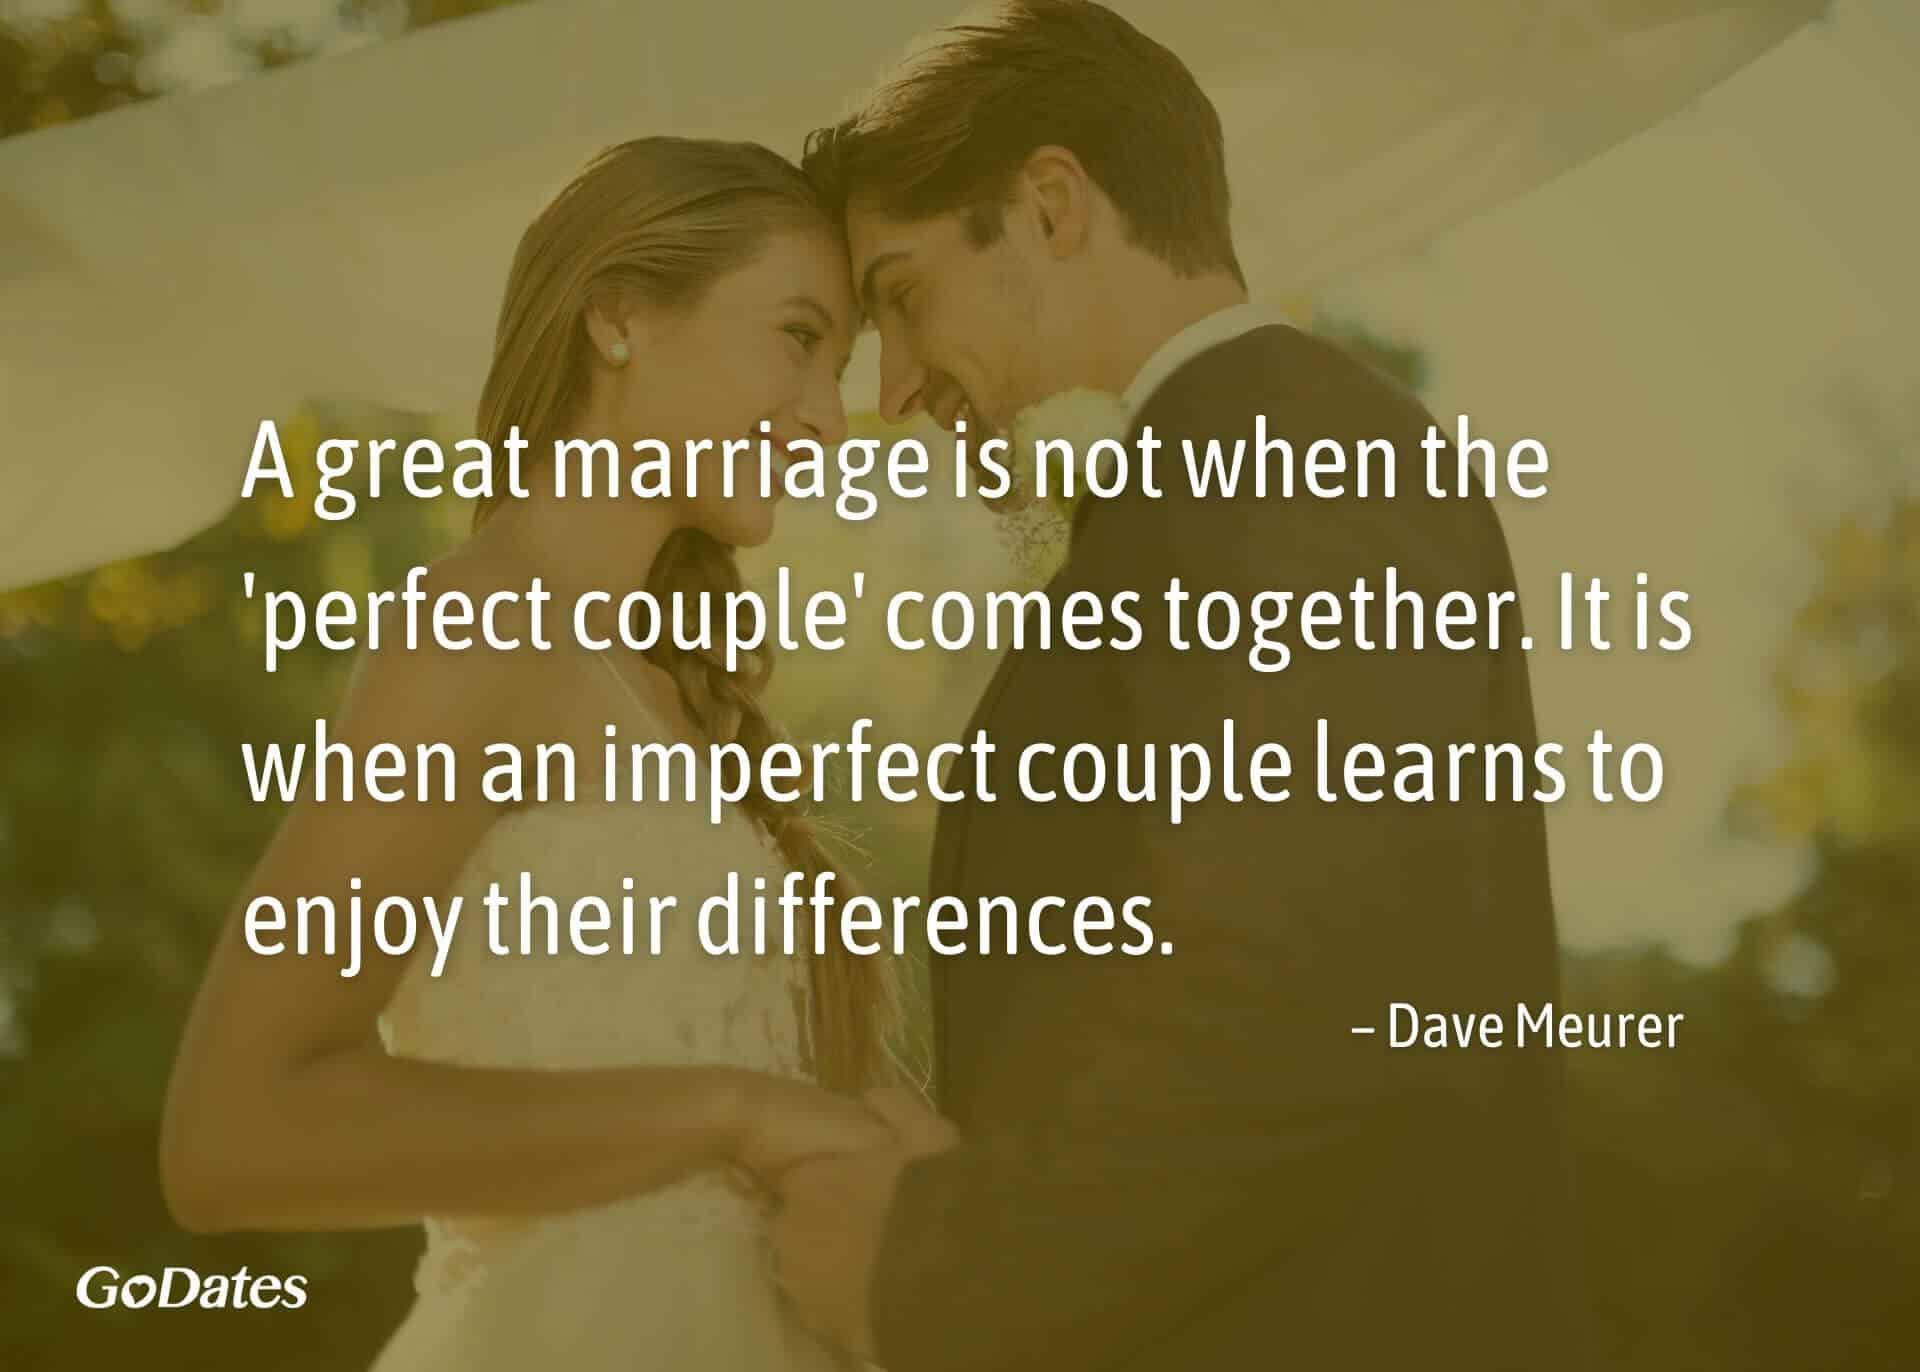 A great marriage is when an imperfect couple enjoys their differences quote